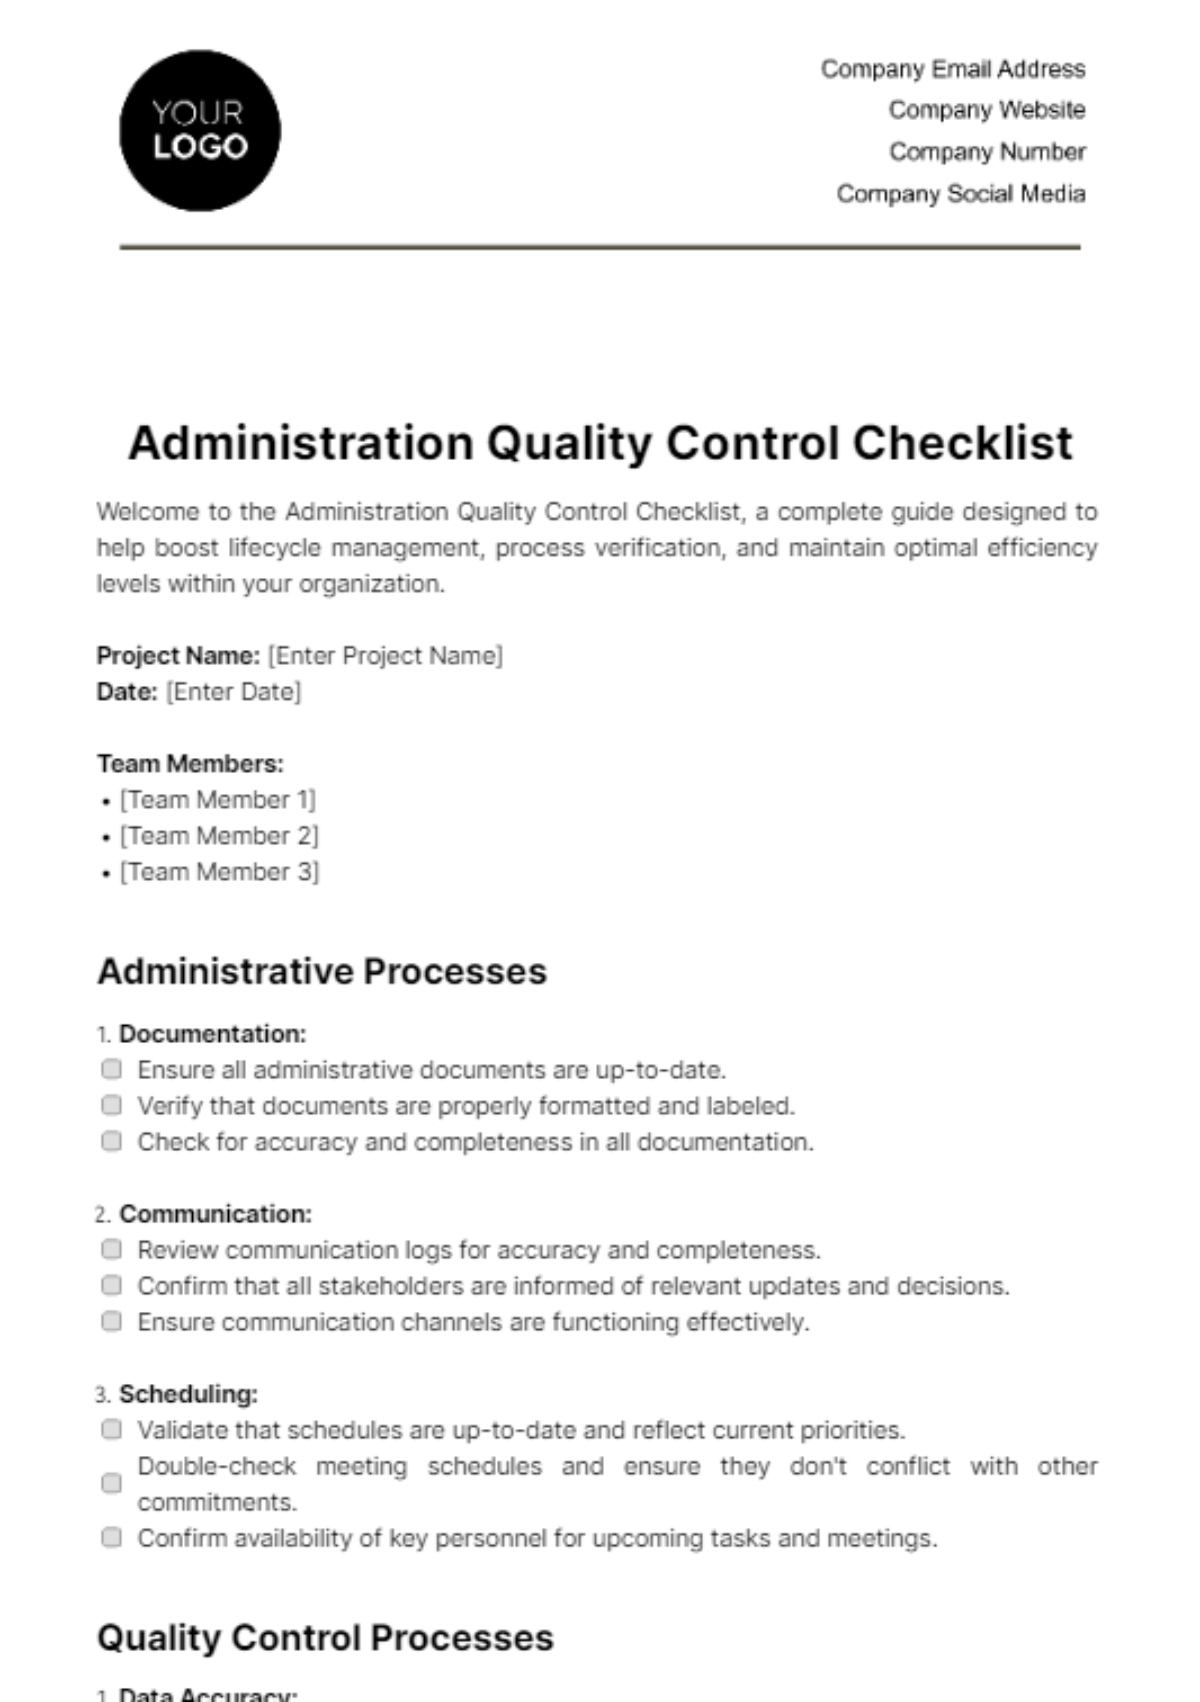 Free Administration Quality Control Checklist Template